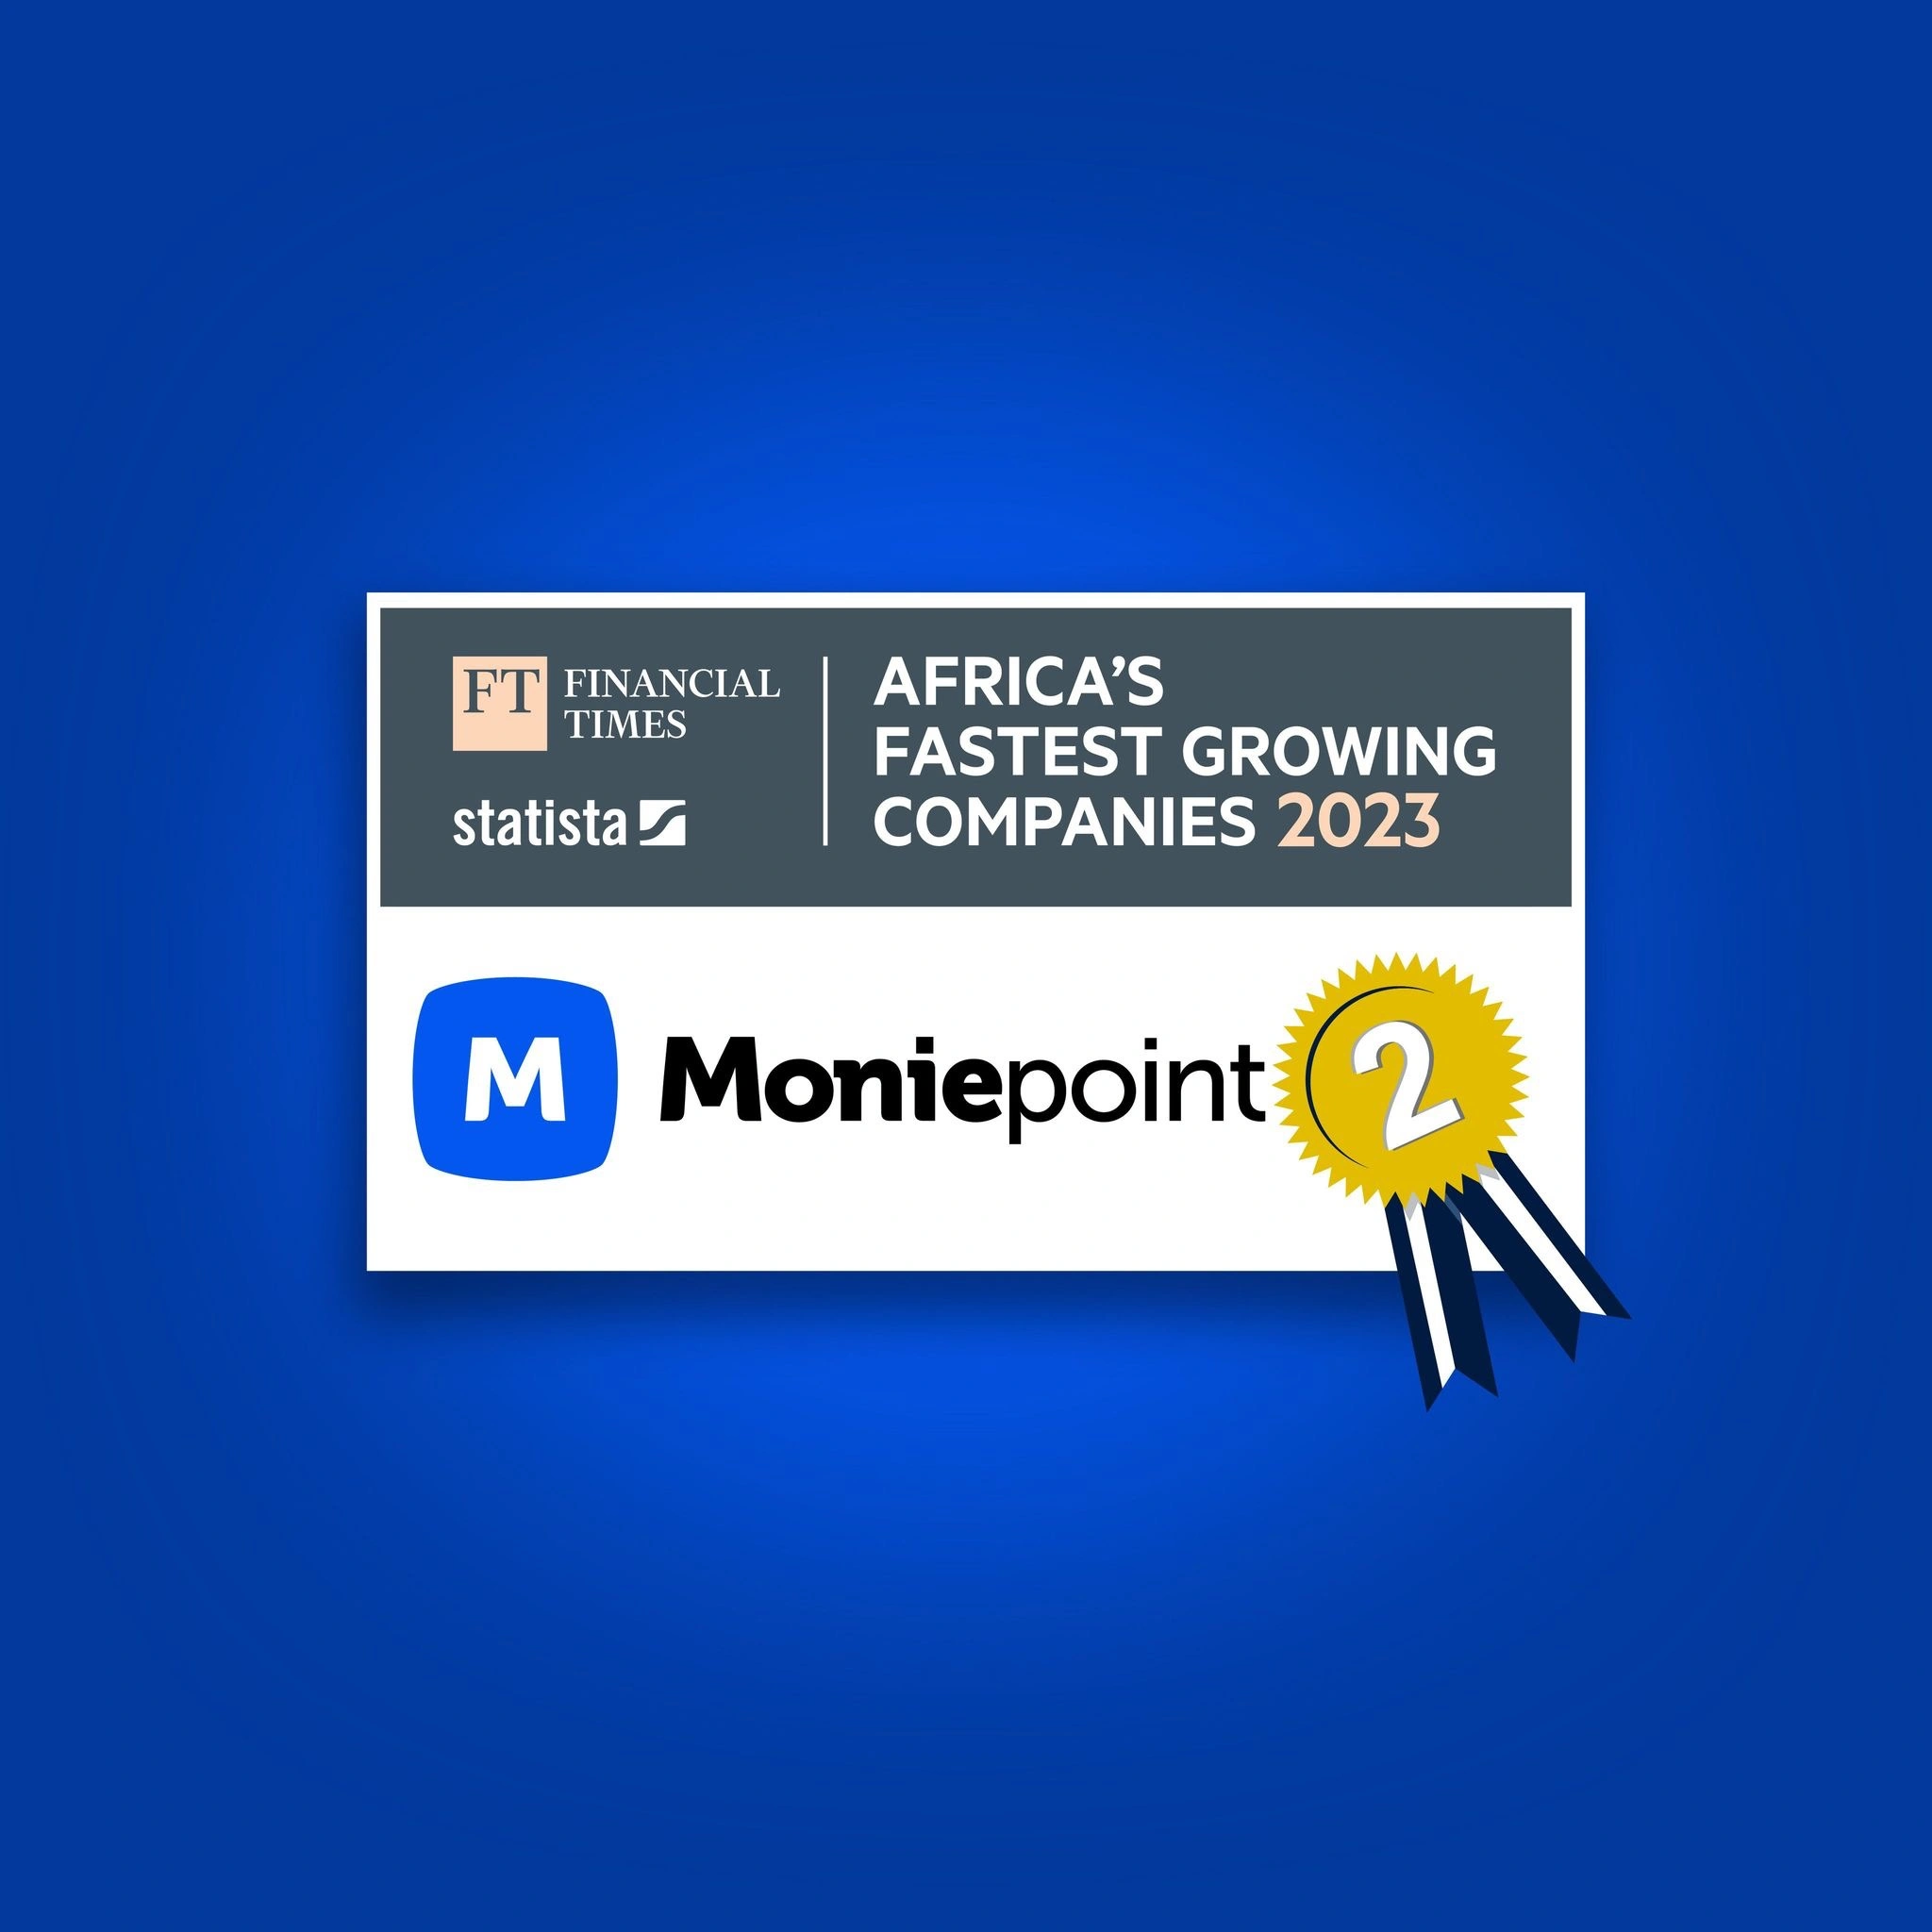 Moniepoint Ranks 2nd on the Financial Times’ List of Africa’s Fastest Growing Companies.